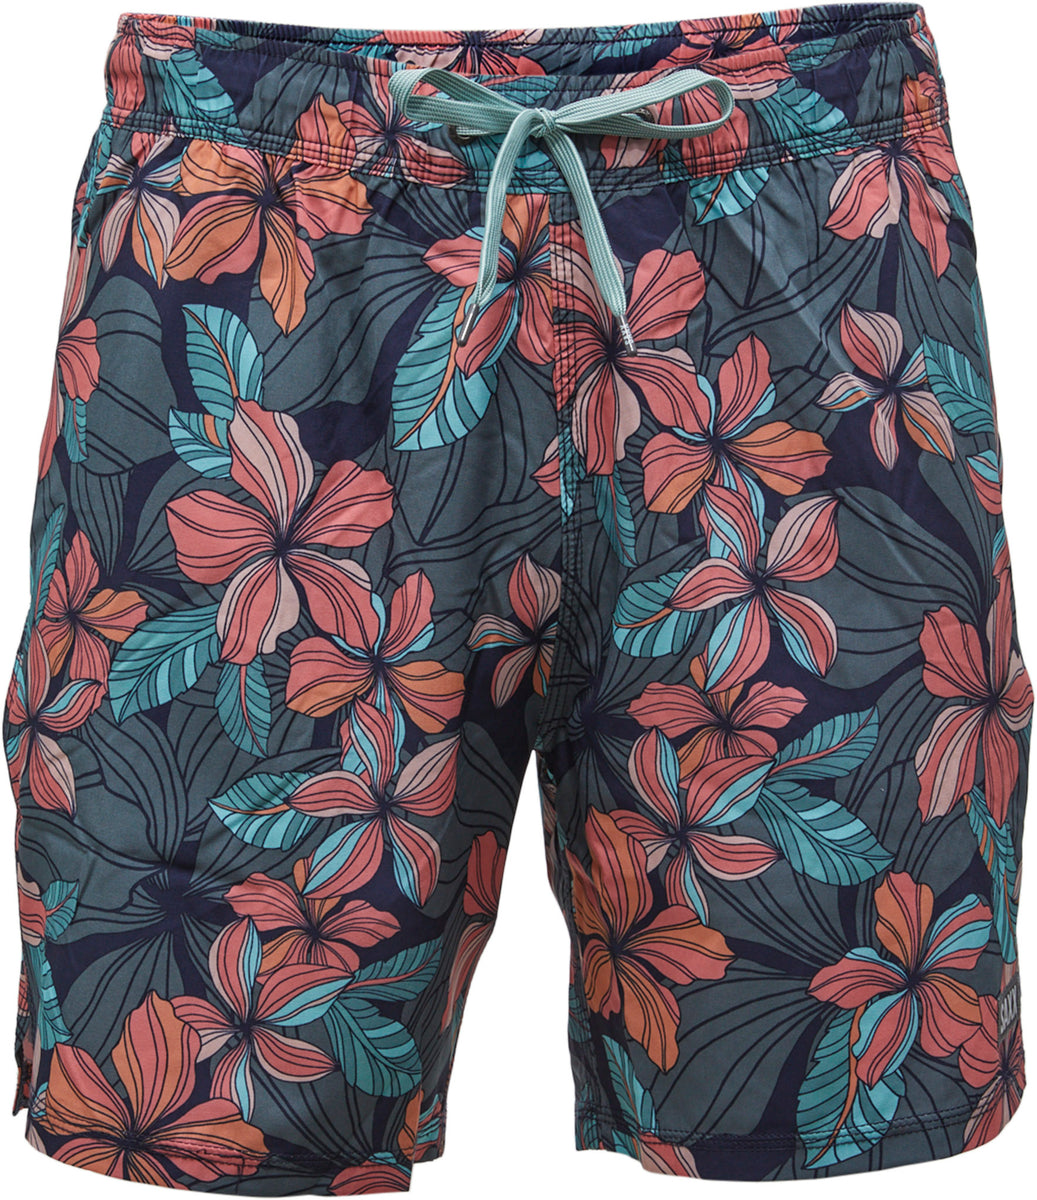 SAXX Oh Buoy 2N1 Volley 7 Inches Swim Shorts - Men's